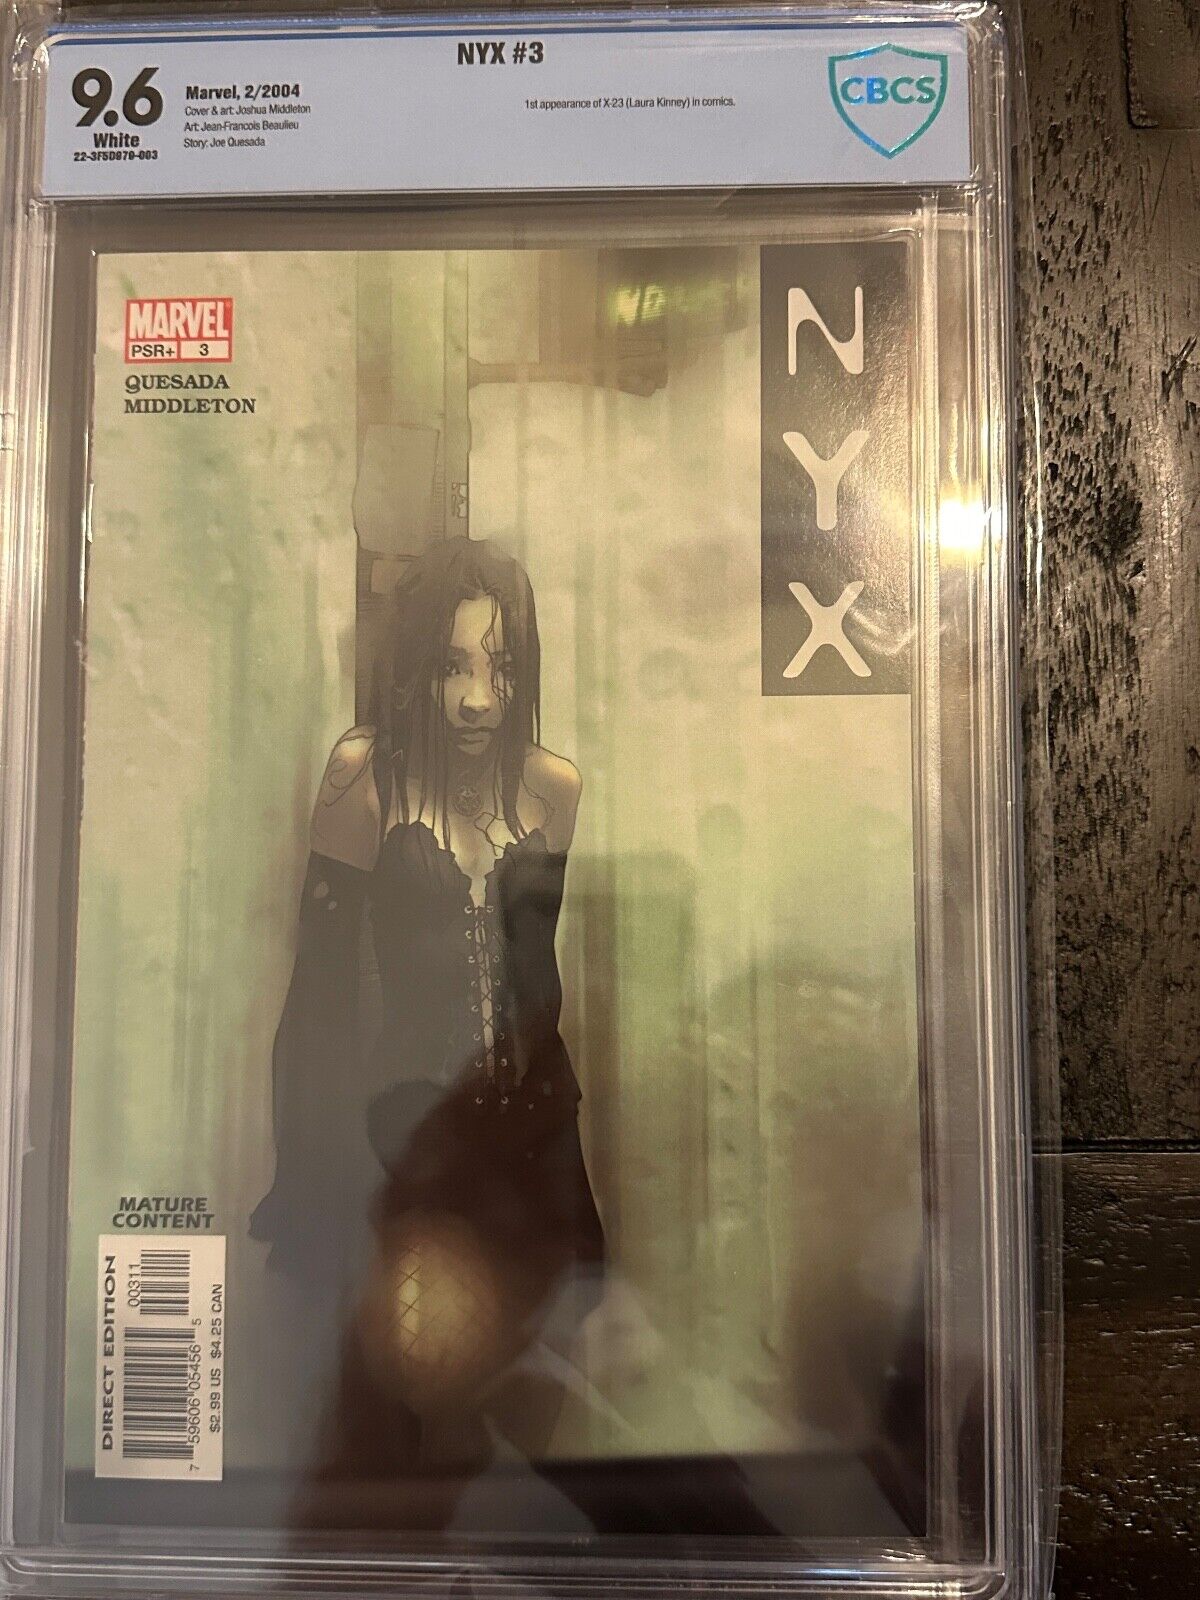 NYX #3 (CBCS 9.6, 1st appearance of X-23)